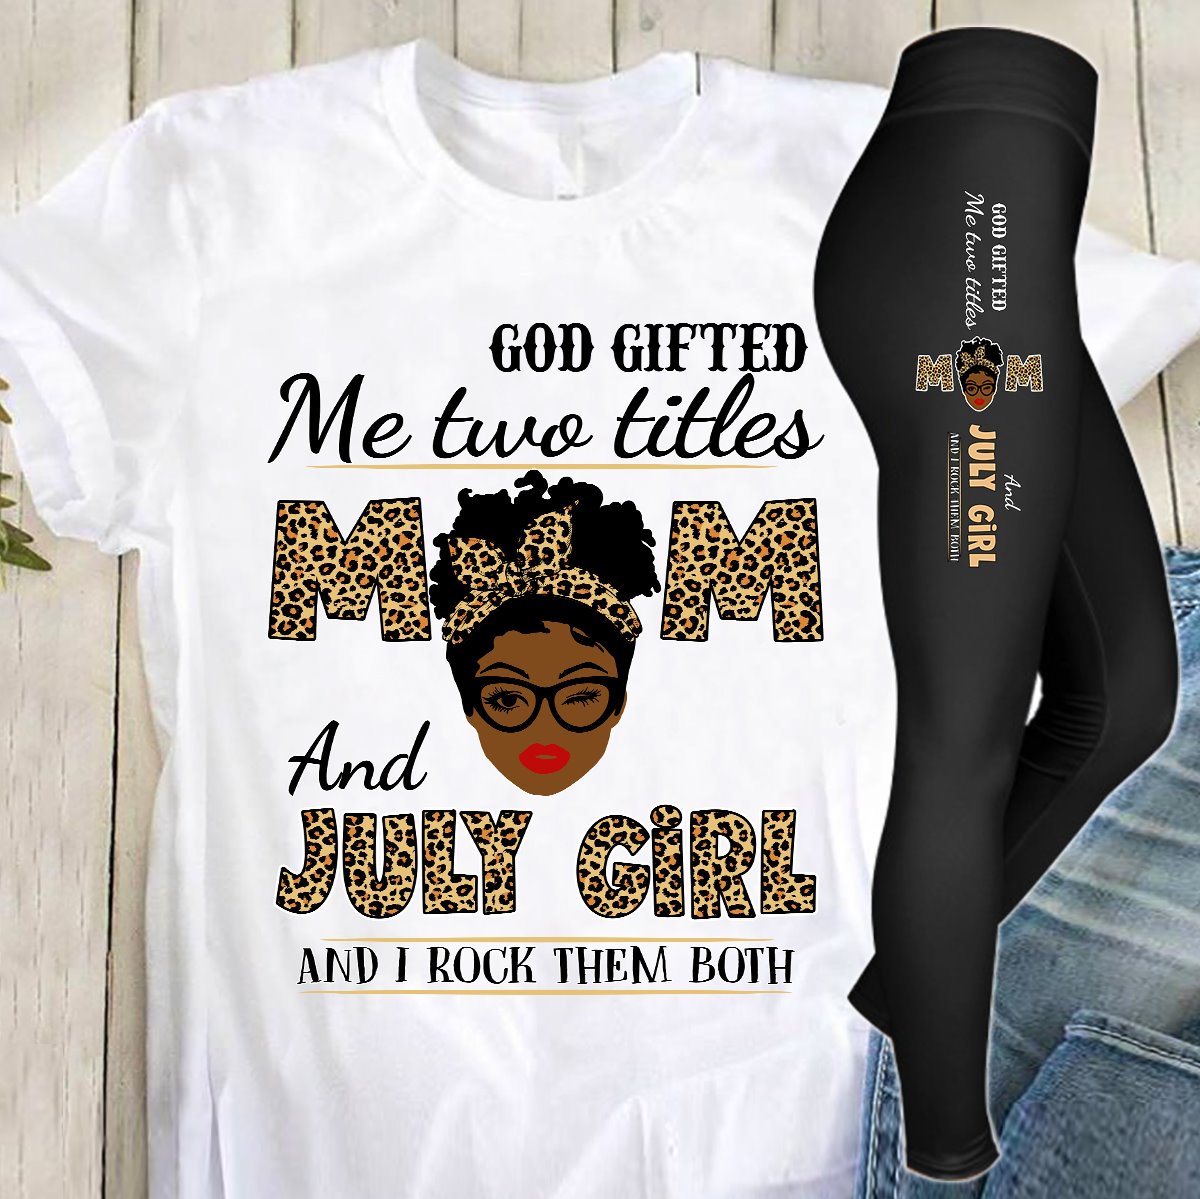 God gifted me two titles mom and july girl and I rock them both - Black girl